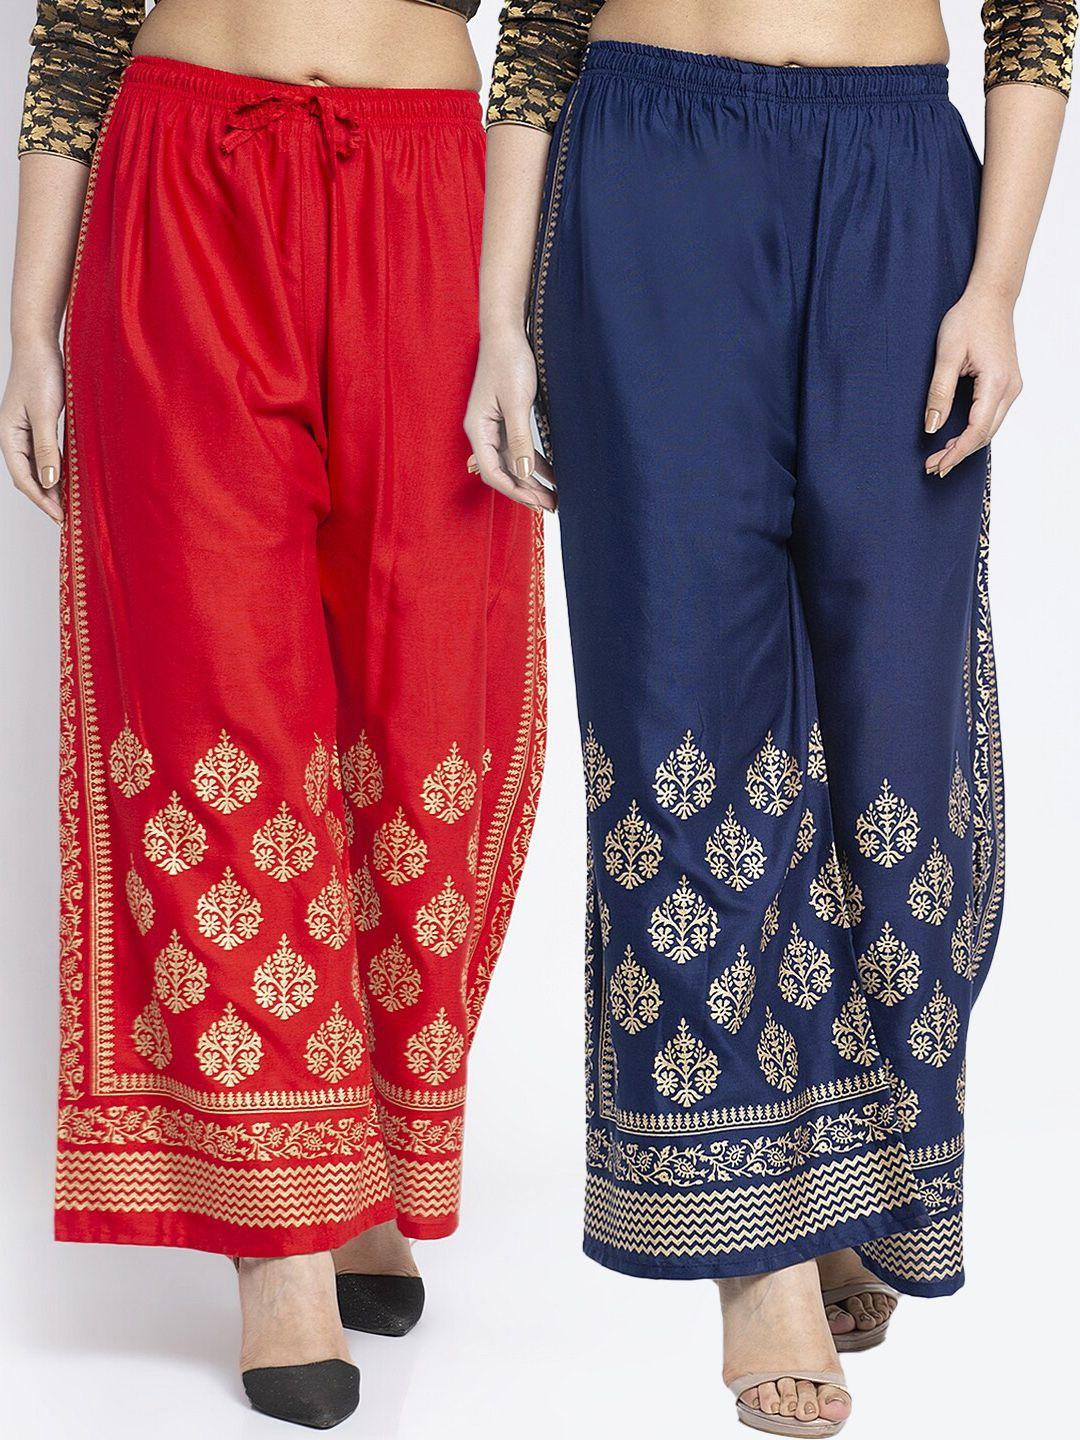 jinfo women red & navy blue ethnic motifs embroidered knitted ethnic palazzos